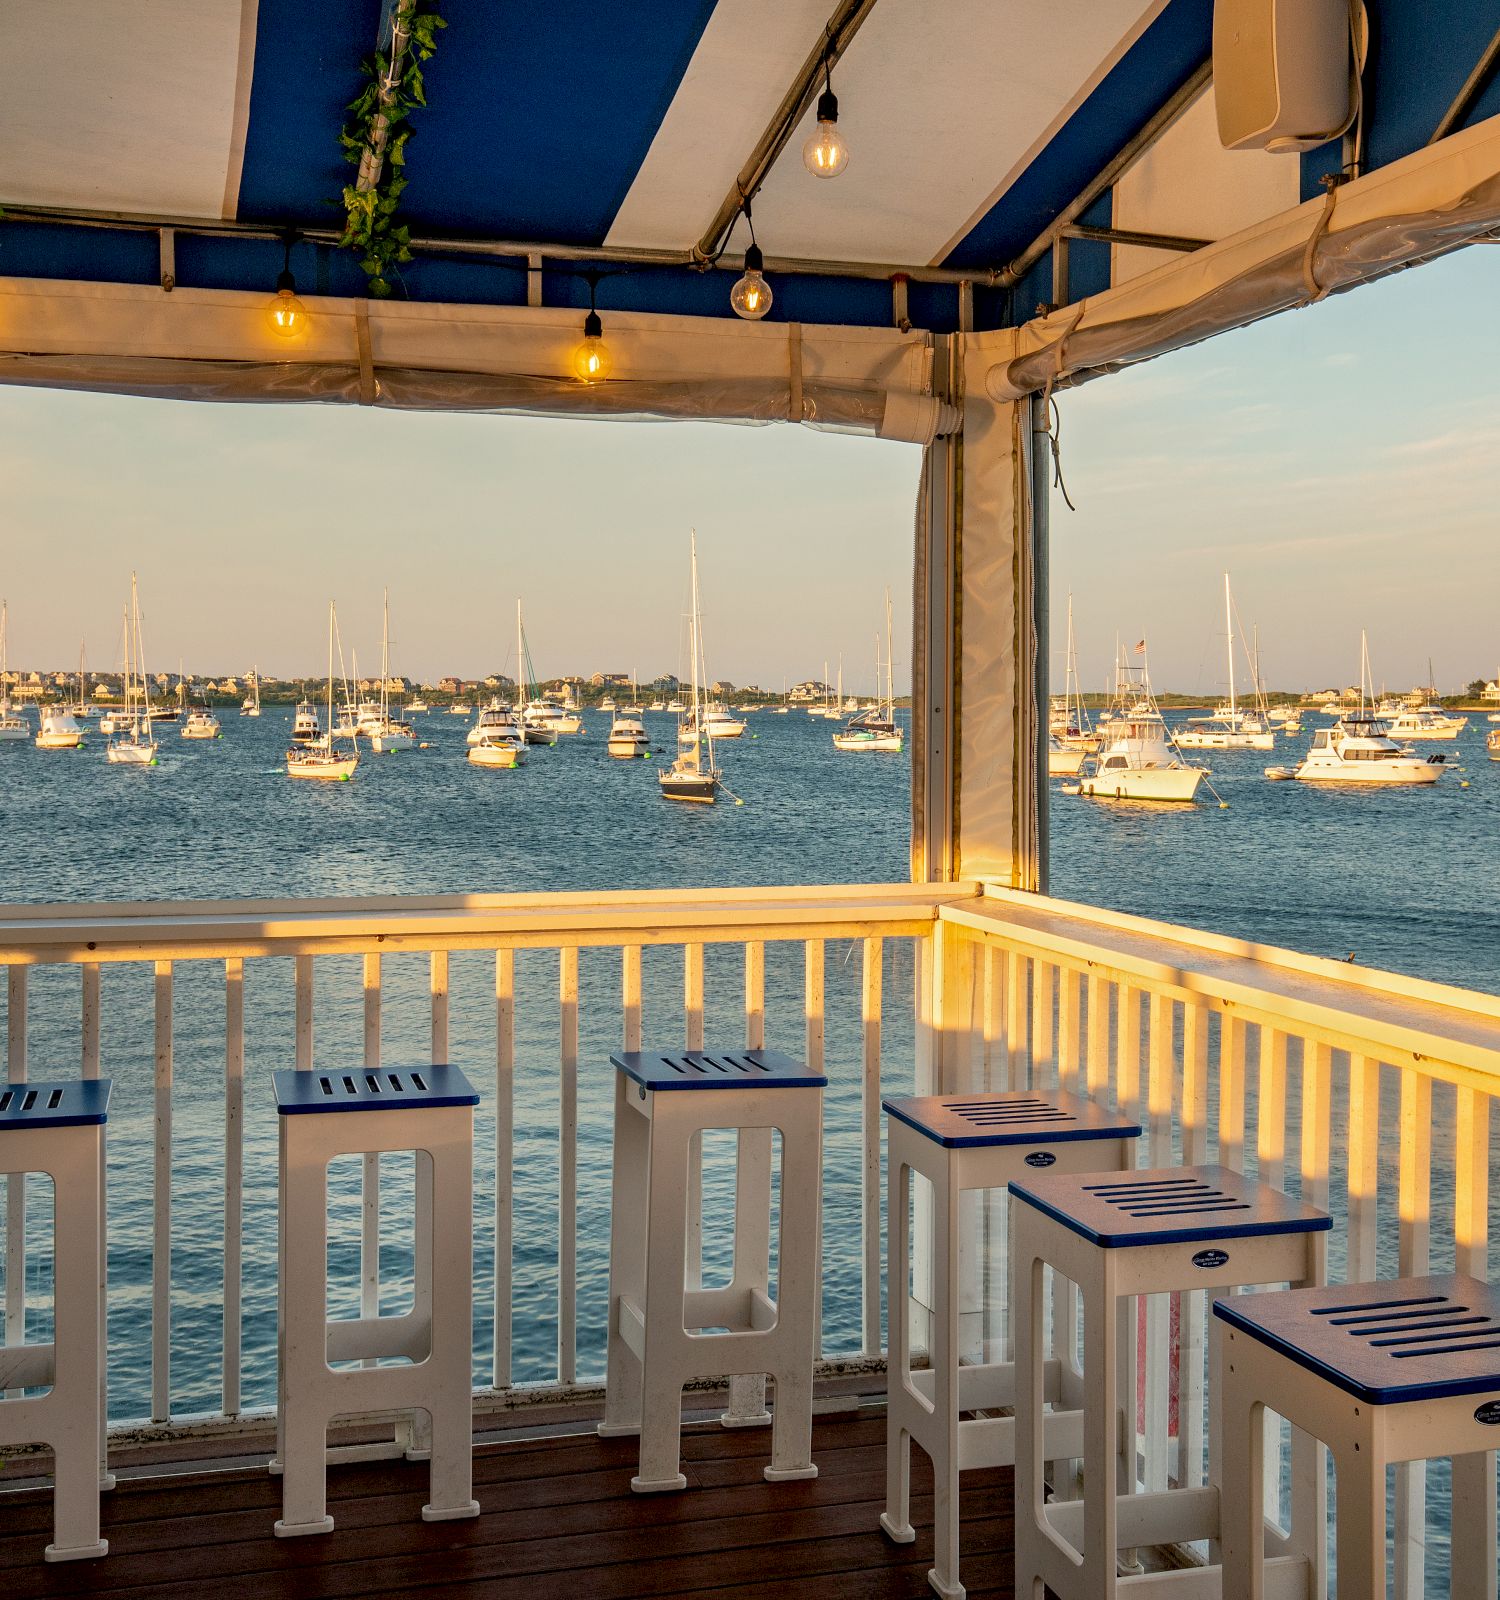 An outdoor seating area with white stools and a striped canopy overlooks a bay filled with sailboats on a sunny day, creating a serene atmosphere.